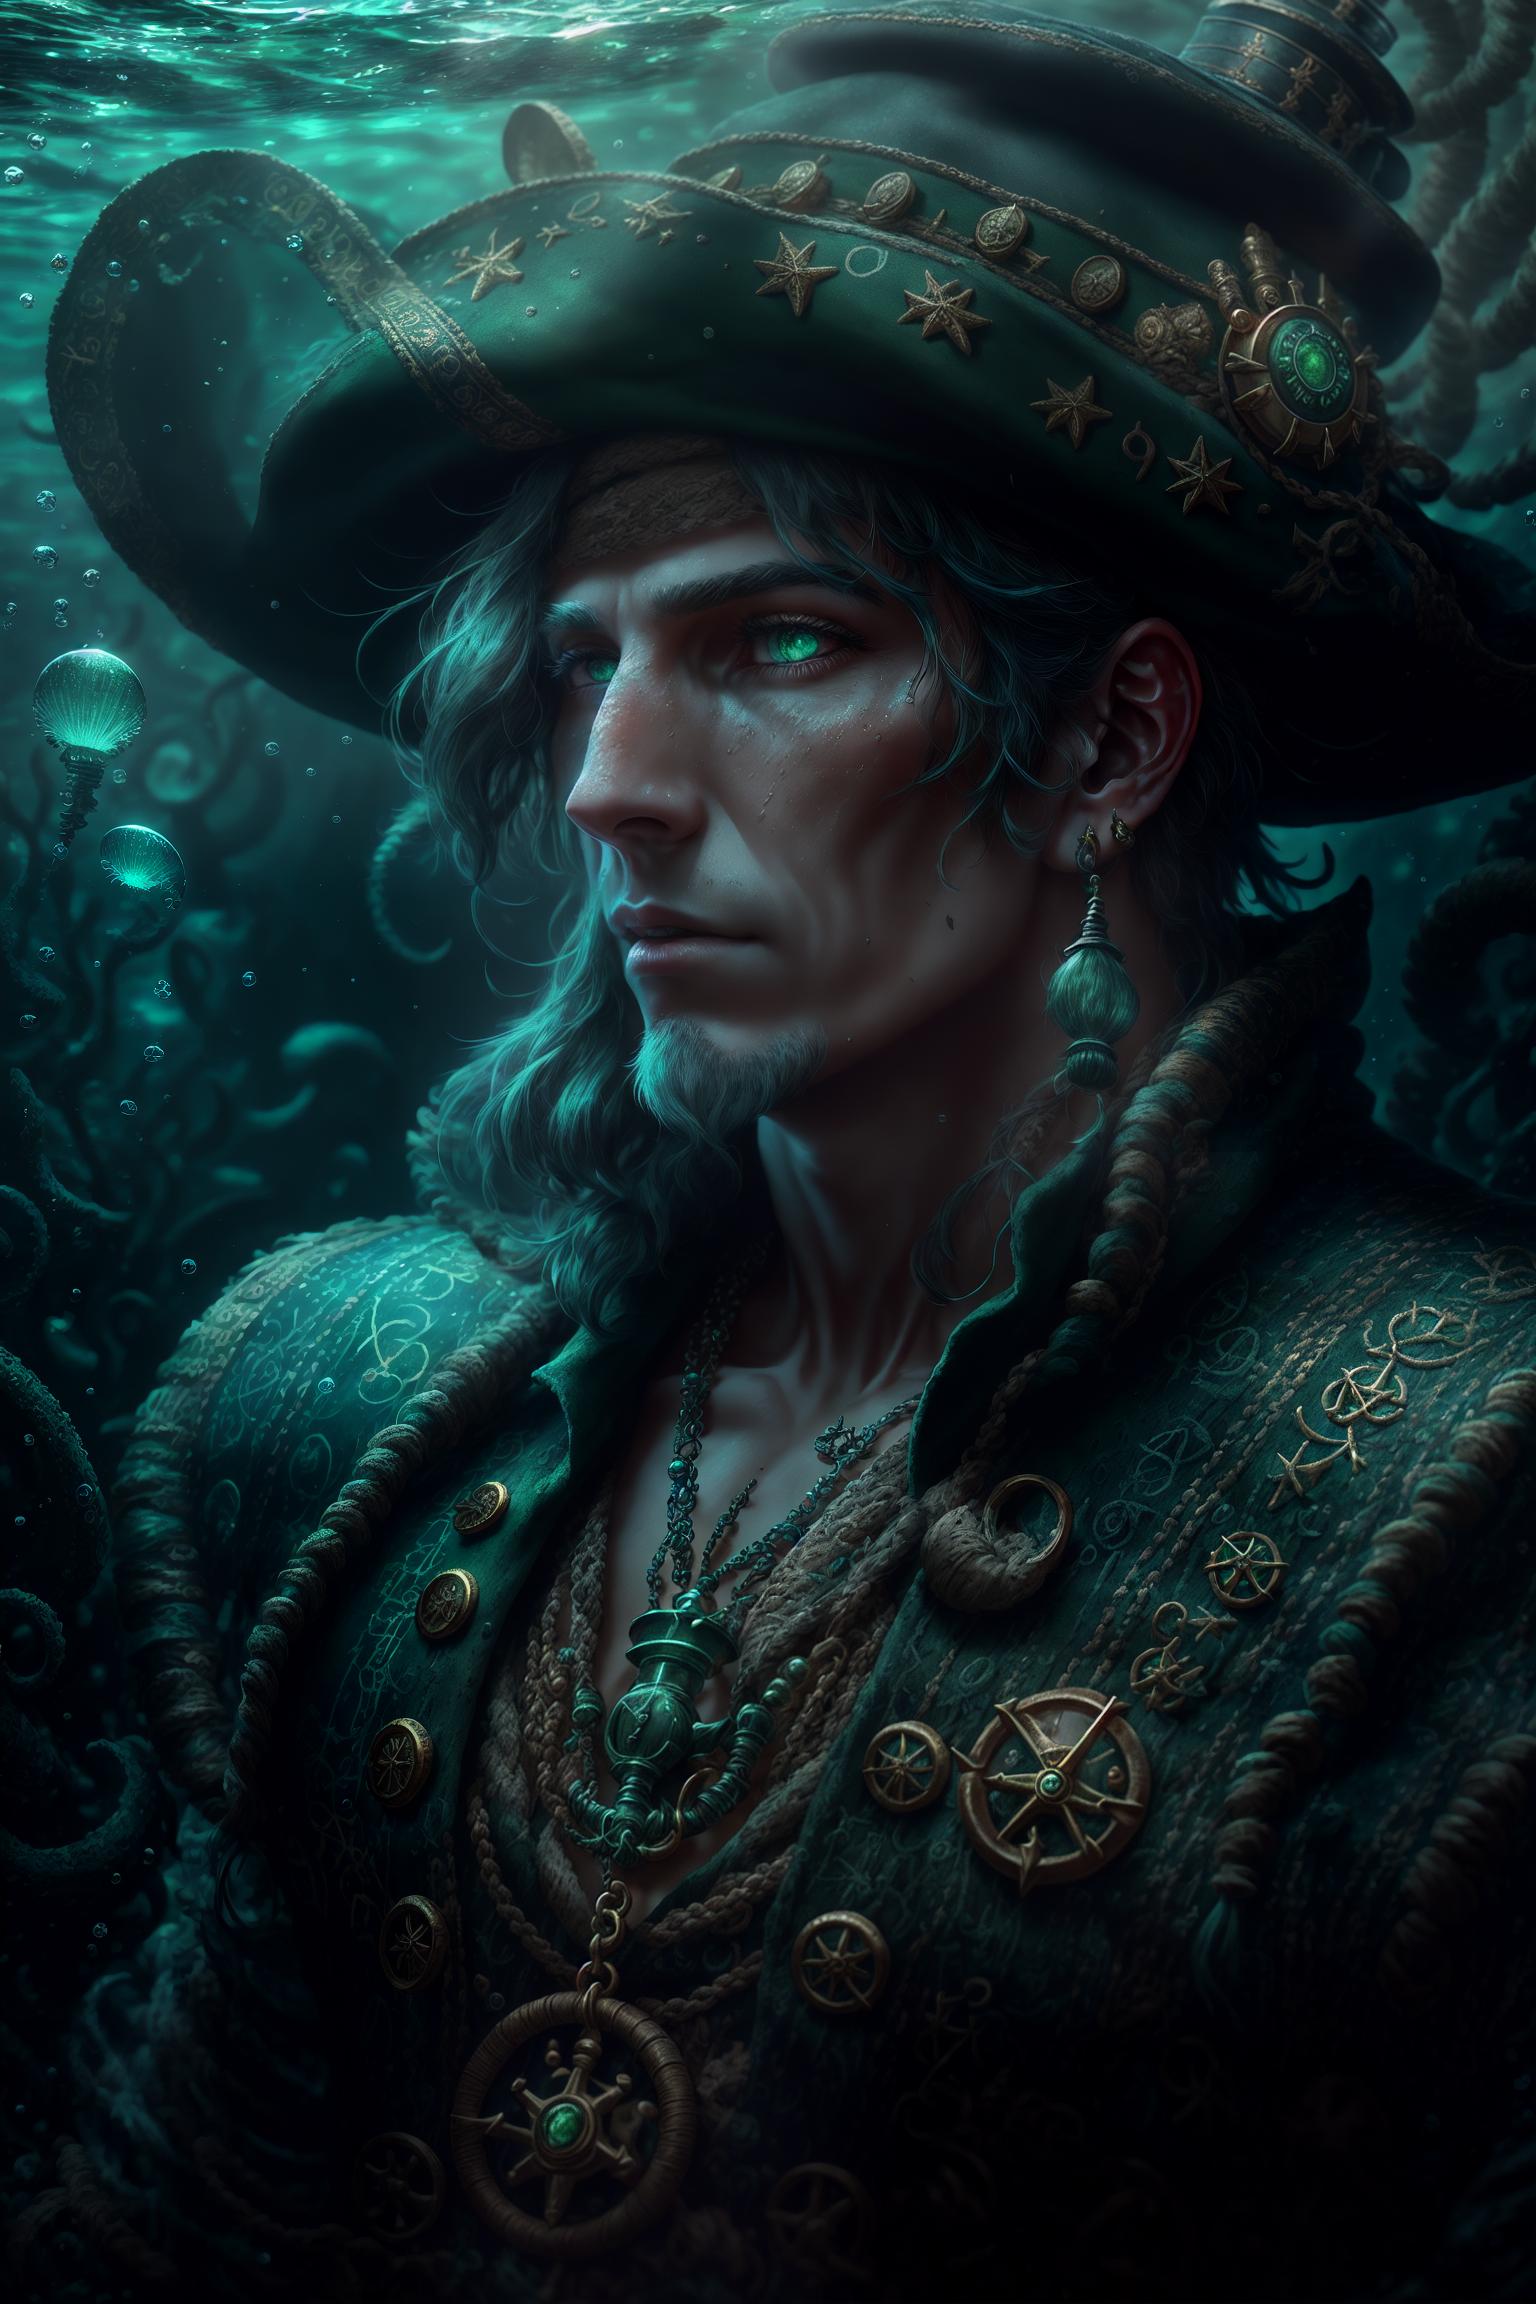  Davy Jones, (sailor characteristics:1.2), (wearing tattered and wet sailor's attire), (possibly wearing a captain's hat or a pirate hat), (marine life traits:1.0), (skin with scales or shells), (parts of the body like arms and face replaced by octopus tentacles), (adding to his mysterious and terrifying image), (glowing green eyes:1.0), (eyes are green and luminous in the dark), (emphasizing his supernatural powers), (anchor chain accessories:1.0), (adorned with rusty anchor chains), (other nautical items), (underwater environment:1.2), (main scene is a deep, dim, and cold seabed), (including various strangely shaped coral reefs), (enormous seagrass forests), (treasure chest element:1.0), (adding an ancient chest covered in algae and barnac hyperrealistic, full body, detailed clothing, highly detailed, cinematic lighting, stunningly beautiful, intricate, sharp focus, f/1. 8, 85mm, (centered image composition), (professionally color graded), ((bright soft diffused light)), volumetric fog, trending on instagram, trending on tumblr, HDR 4K, 8K